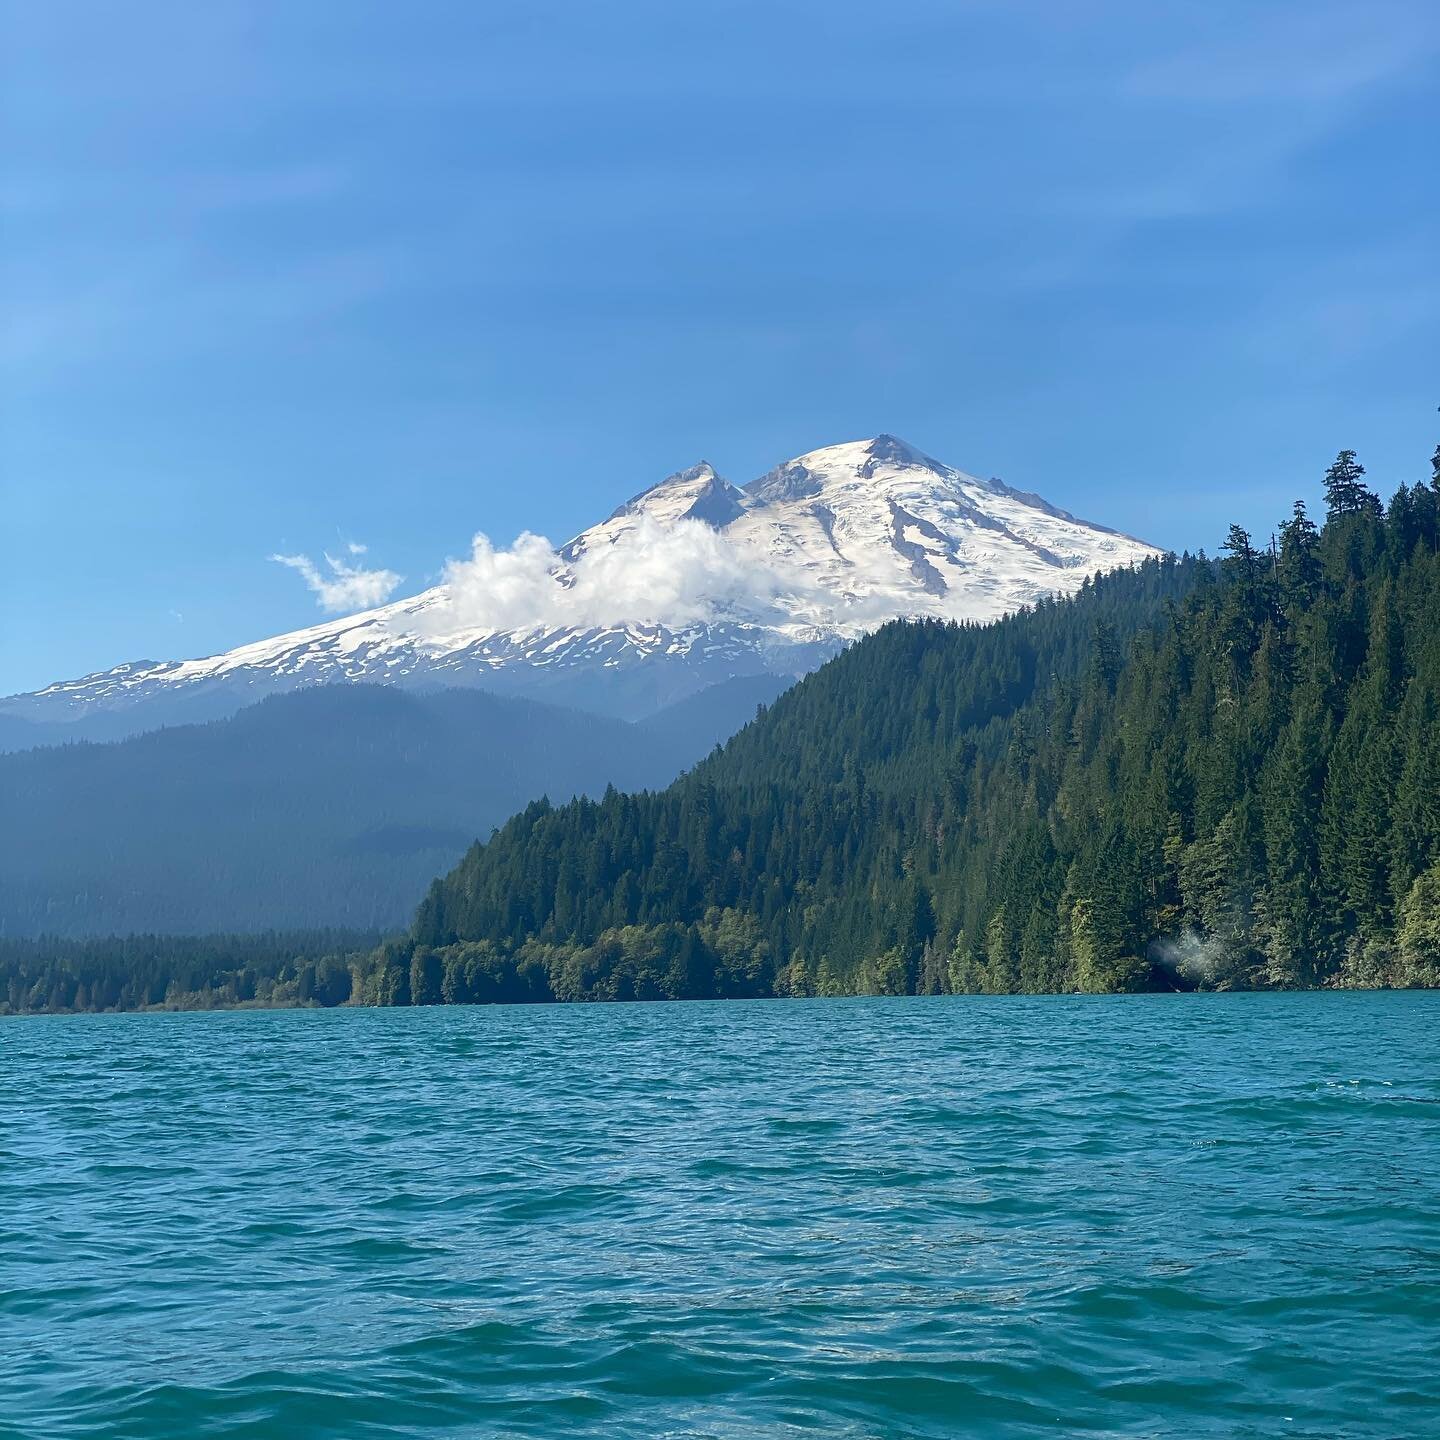 In honor of Volcano Awareness Month, here some pictures of 4 of our 5 beloved volcanoes in Washington State. The one not pictured is exactly the one you&rsquo;d expect to not be pictured. 

☑️ Now you are aware of volcanoes. 

#movefatgirl #volcanoes